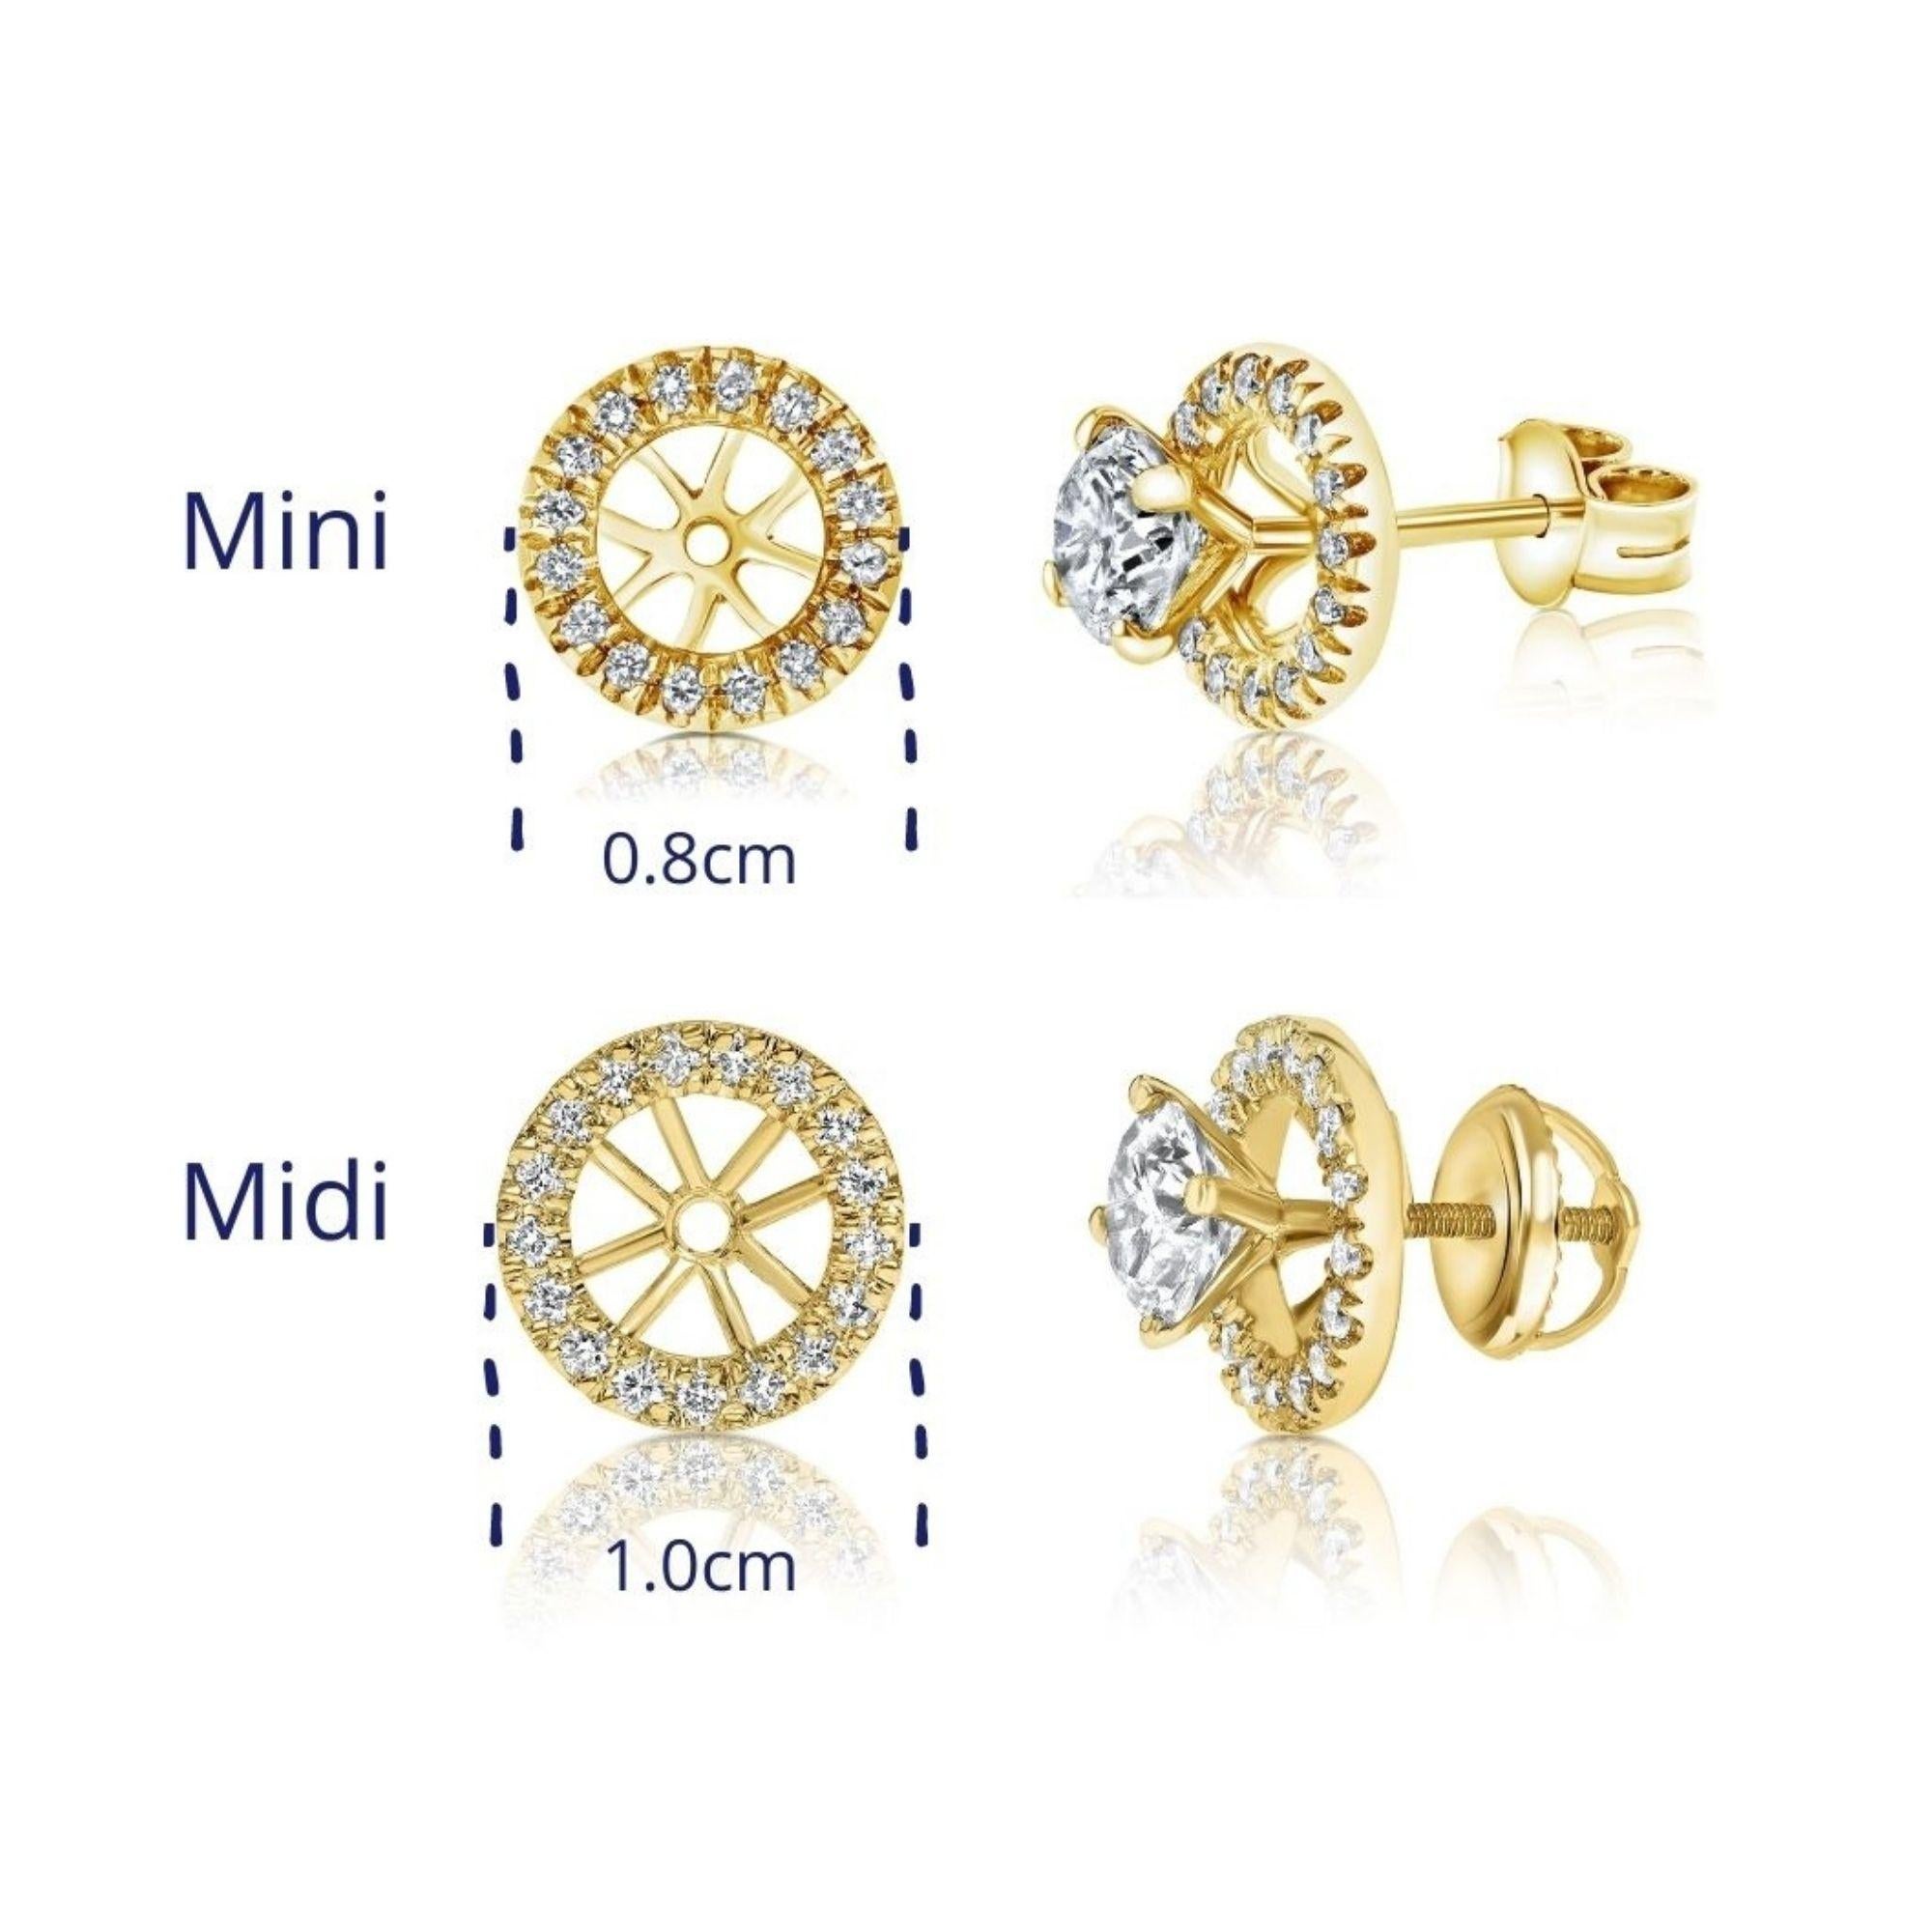 0.26 Carat Midi Round Diamond Ear Jacket Add-On in 14 Karat Yellow Gold, Shlomit Rogel

Jazz up your ear! Delicately embellished with white diamonds, this round 14k yellow gold ear extension will complete your stud earrings. You can add your own